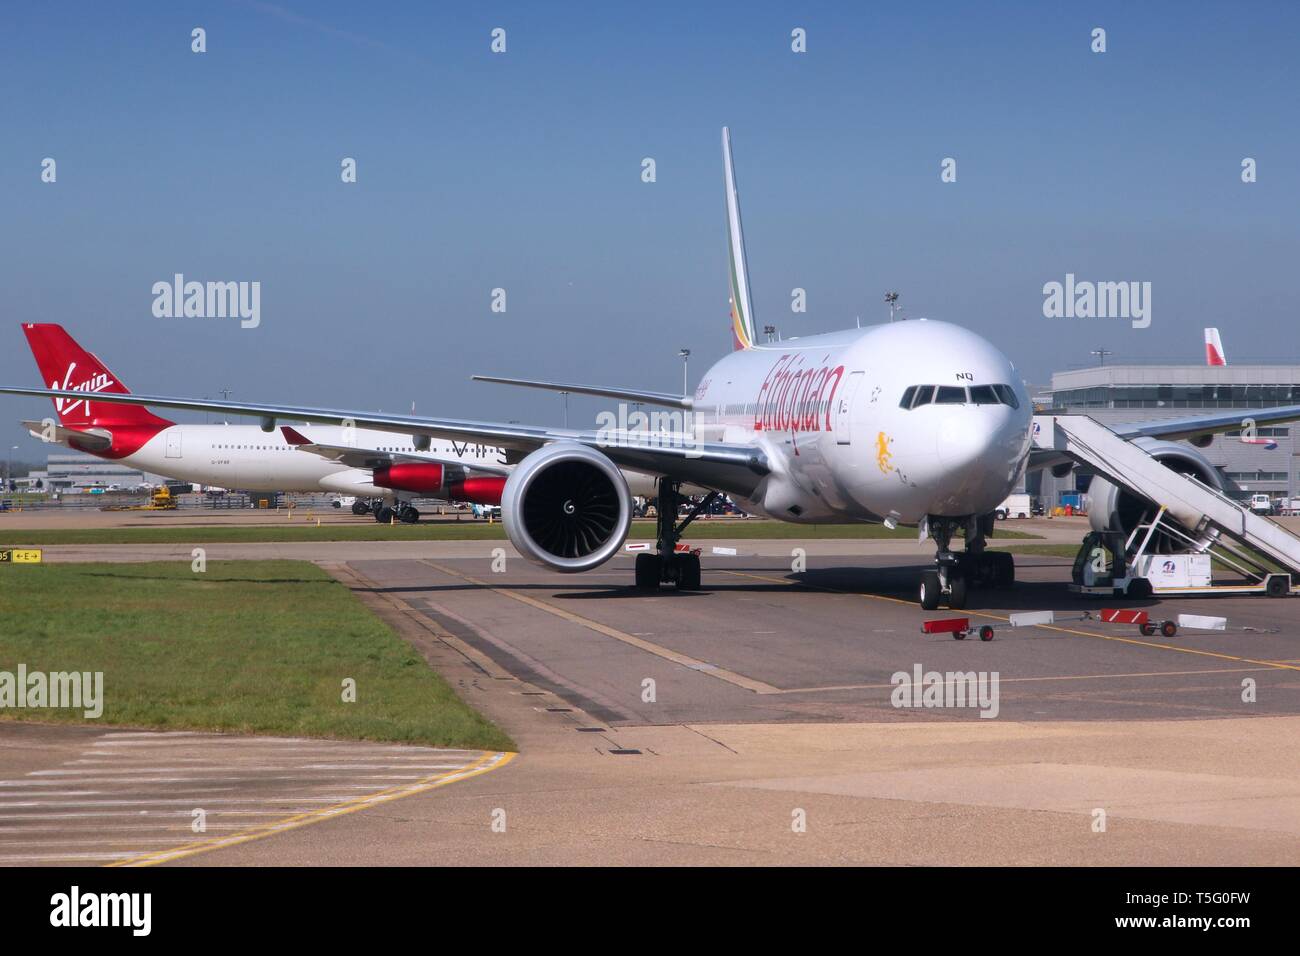 LONDON, UK - APRIL 16, 2014: Ethiopian Airlines Boeing 777 at London Heathrow airport. Ethiopian carried 6 million passengers in 2013. Stock Photo